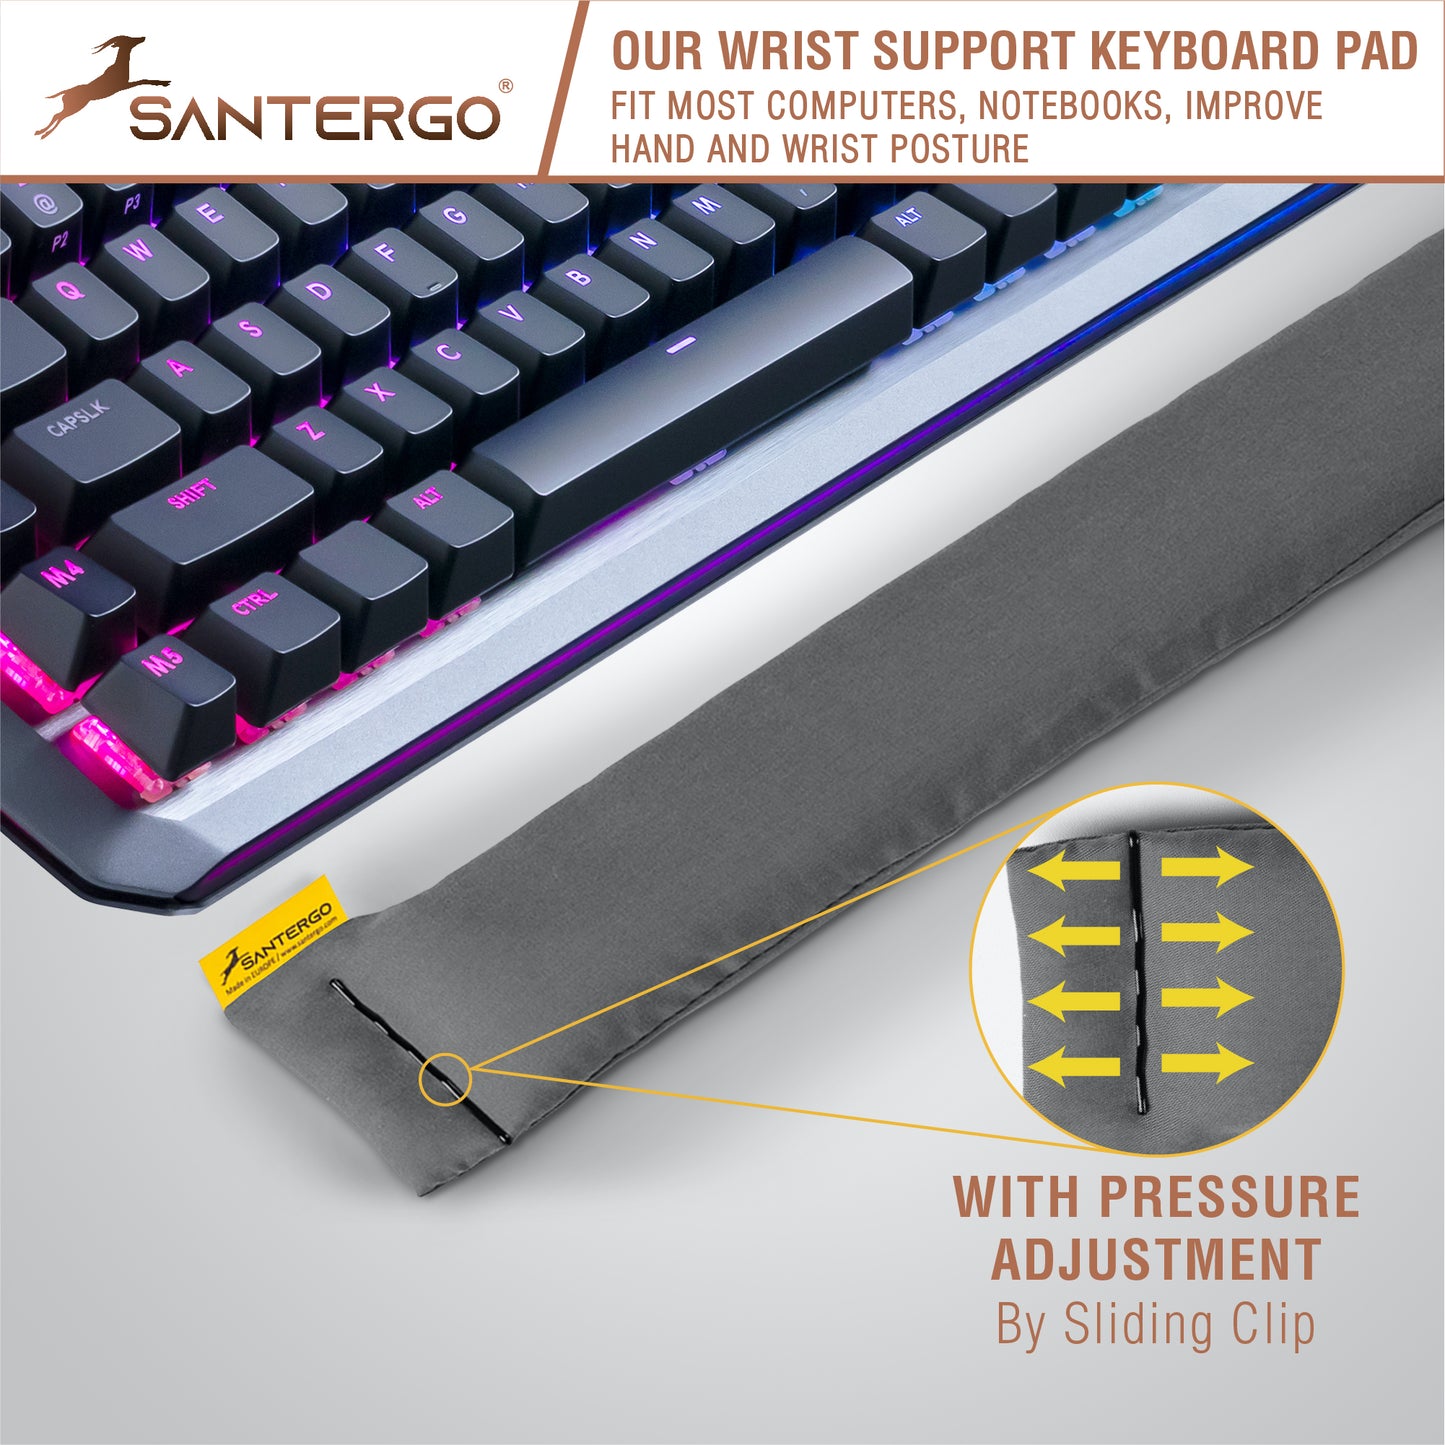 SANTERGO Keyboard Pad (2.0-Premium) Wrist Rest Ecological Ergonomic with Organic Millet Chaff, to Relieve The Wrists, Cushion Support, Easy Typing, Office, Computer, Pillow Fabric: TENCEL®